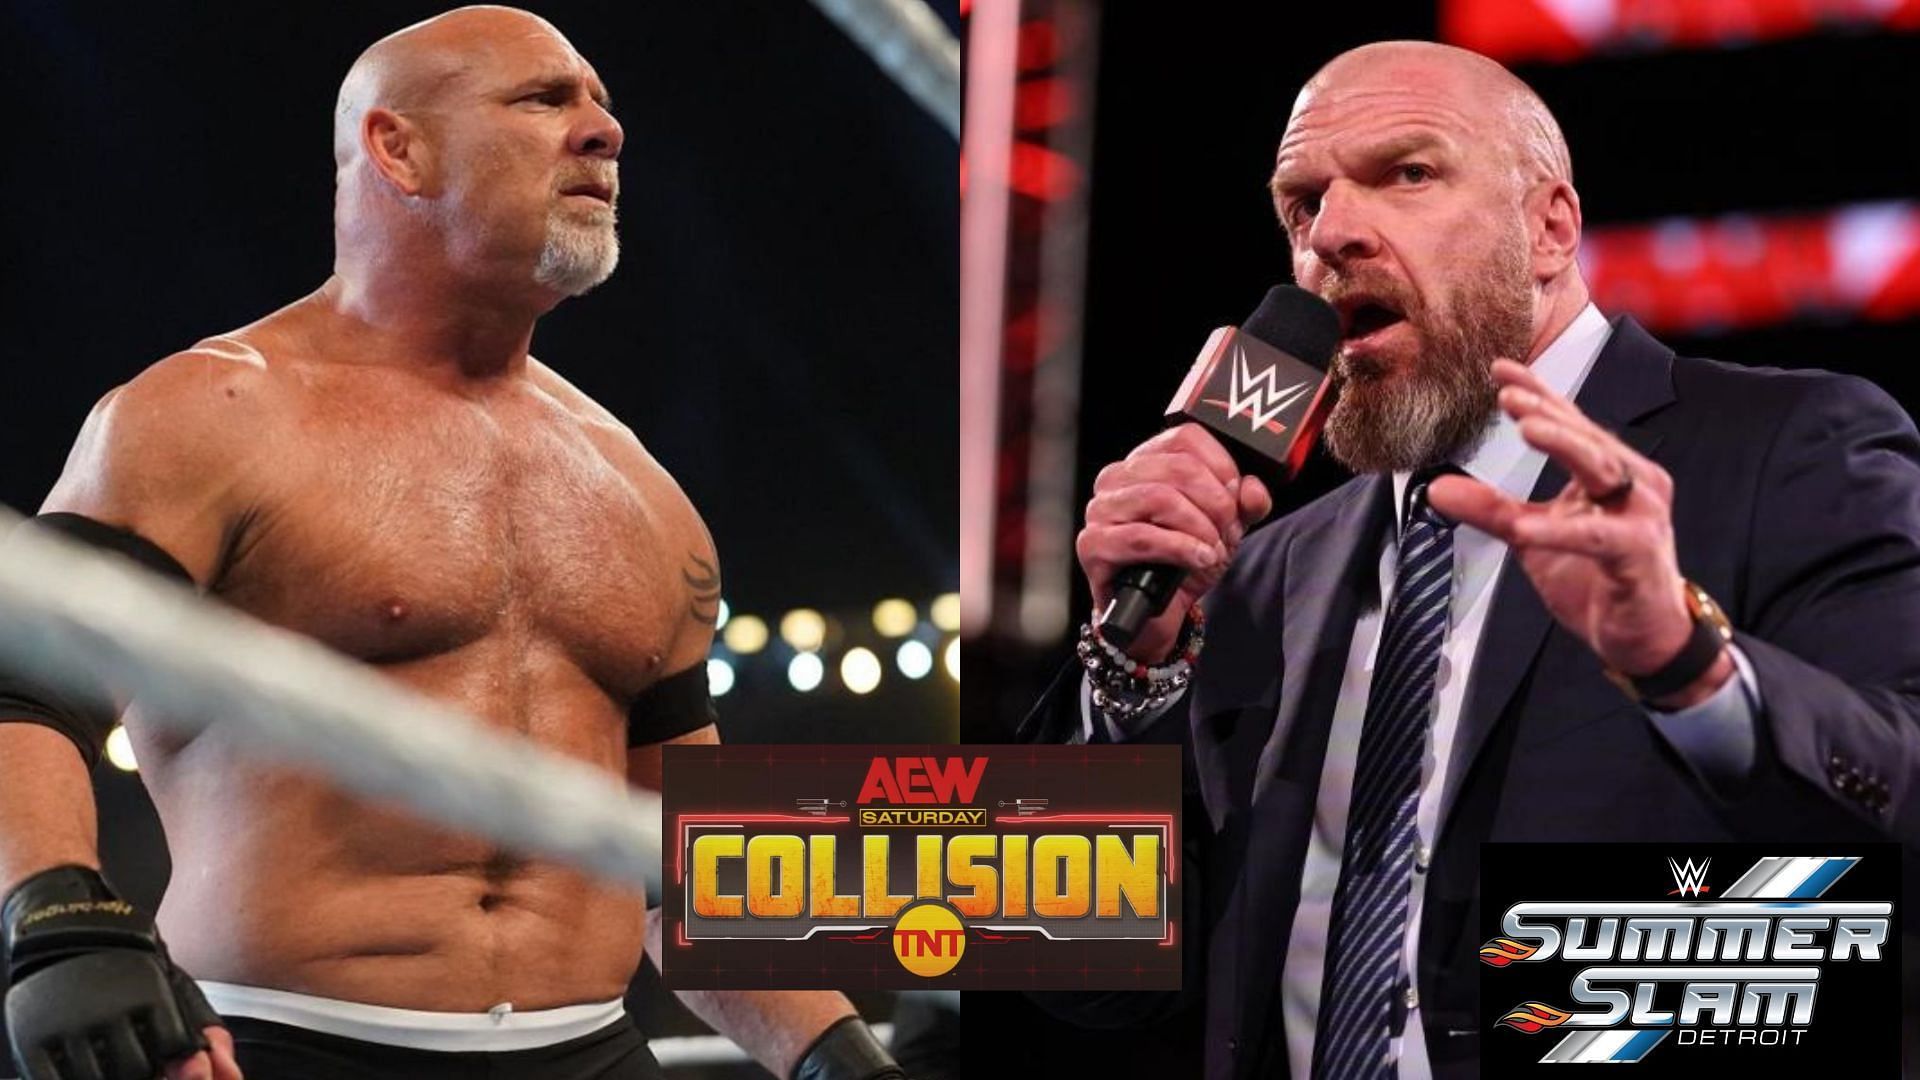 AEW Collision will go head to head with WWE SummerSlam in August